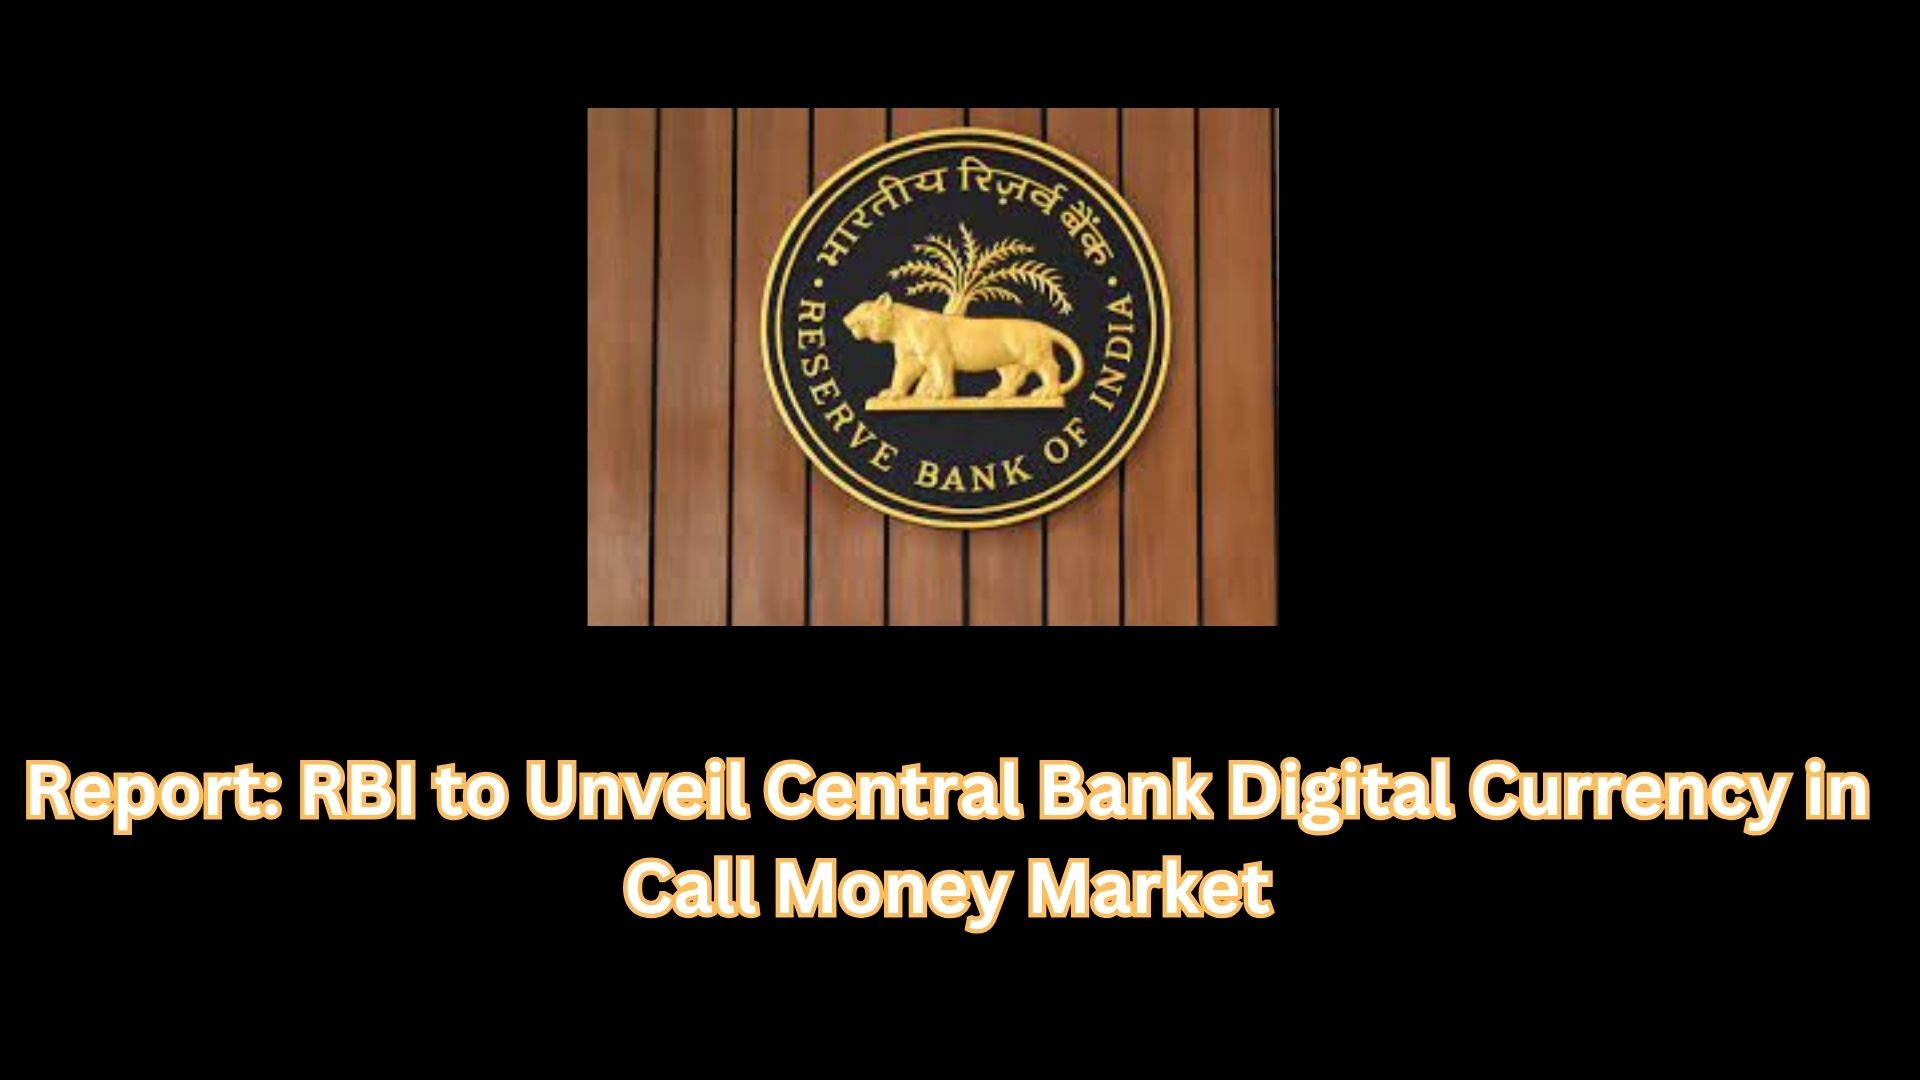 Report: RBI to Unveil Central Bank Digital Currency in Call Money Market